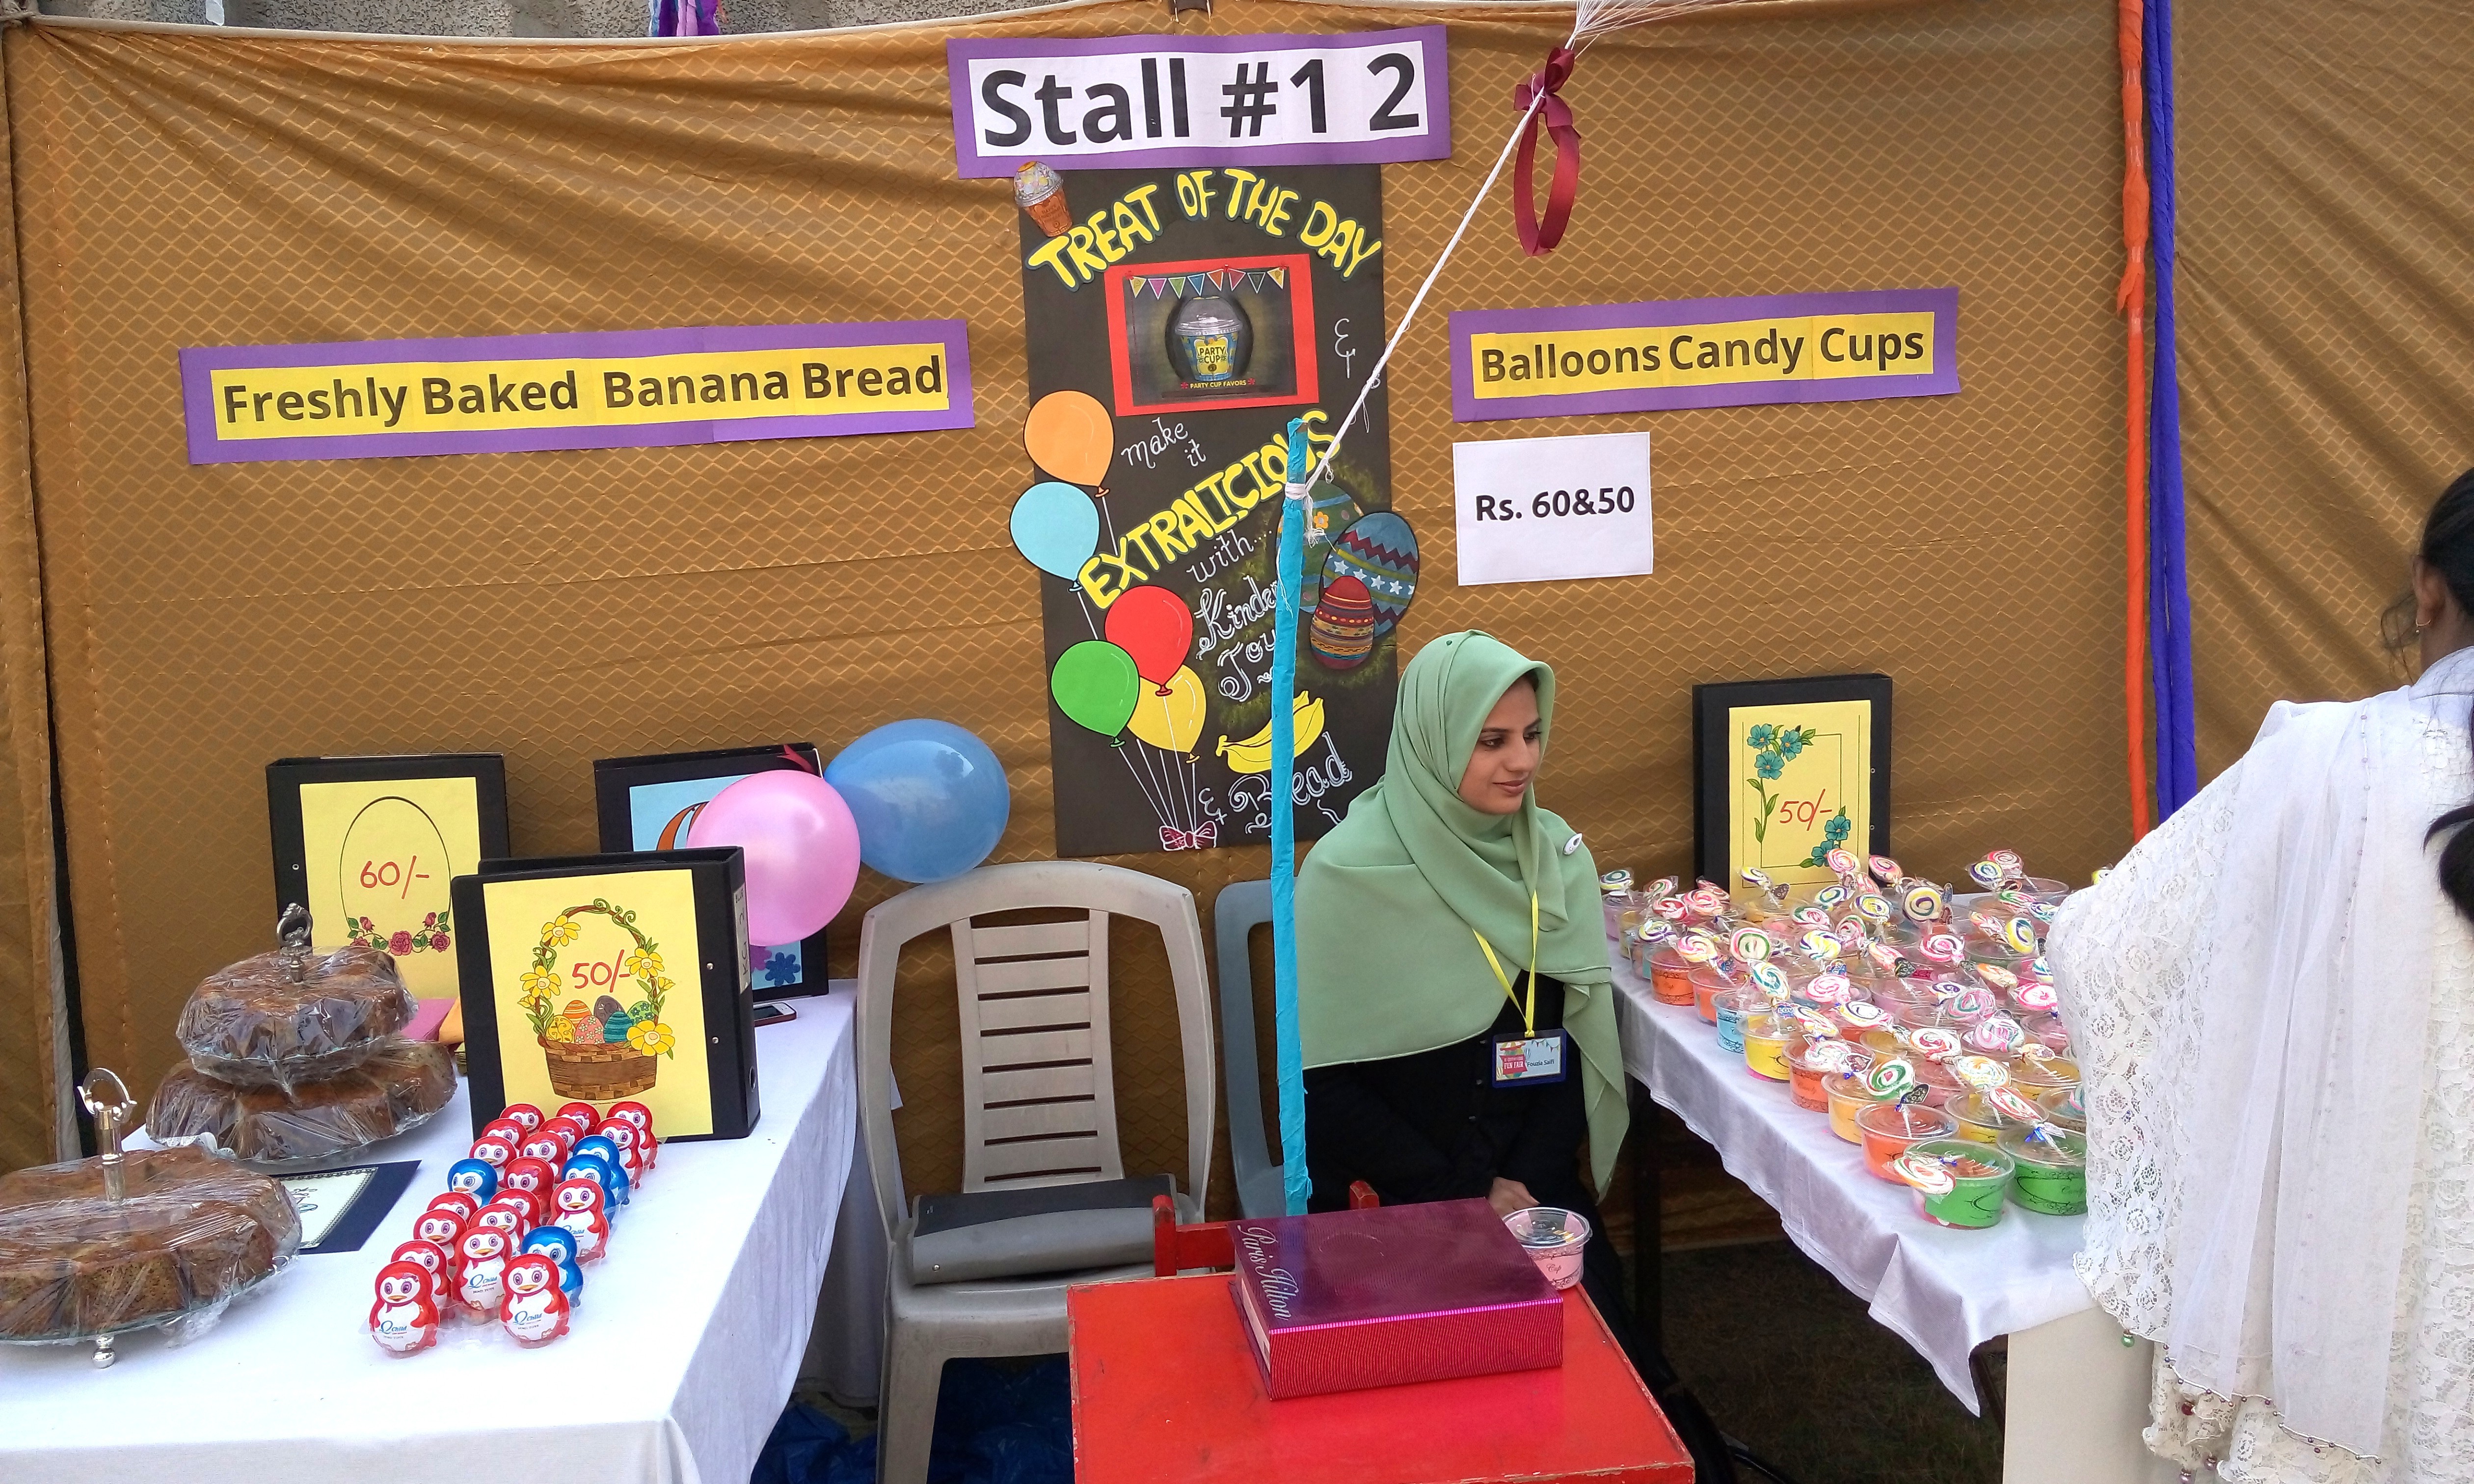 Stall 12 - Freshly Baked Banana Bread, Balloons & Candy Cups